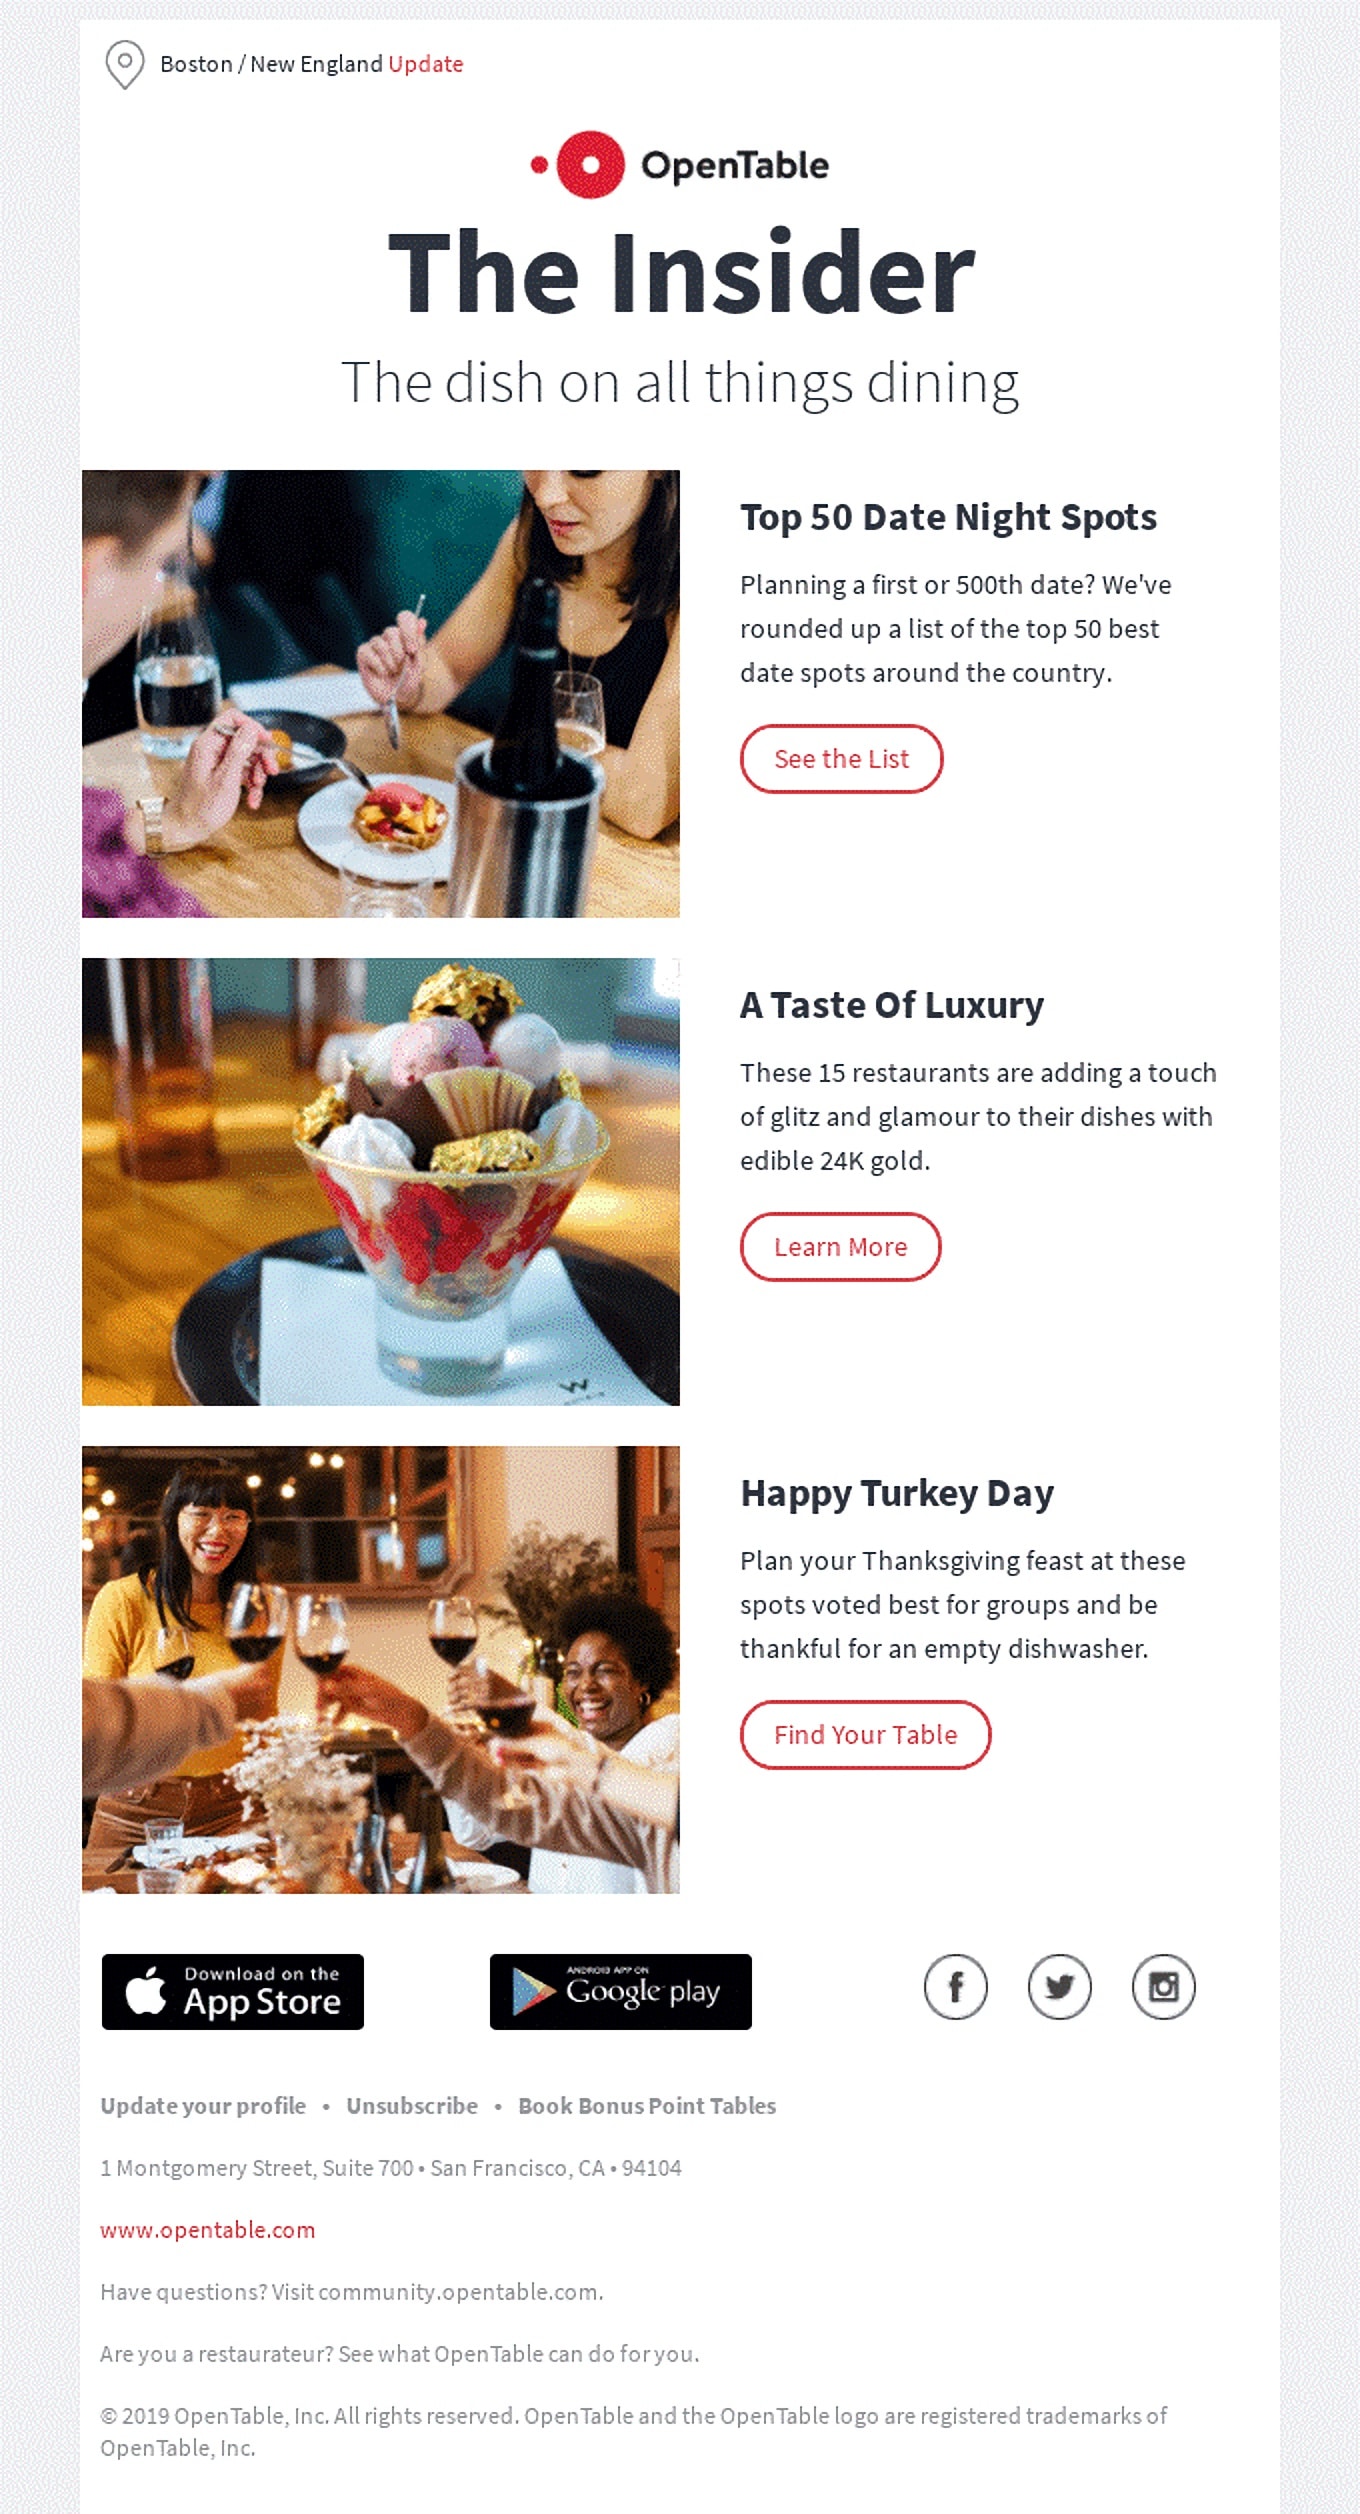 OpenTable Provides Social Media Links in Email